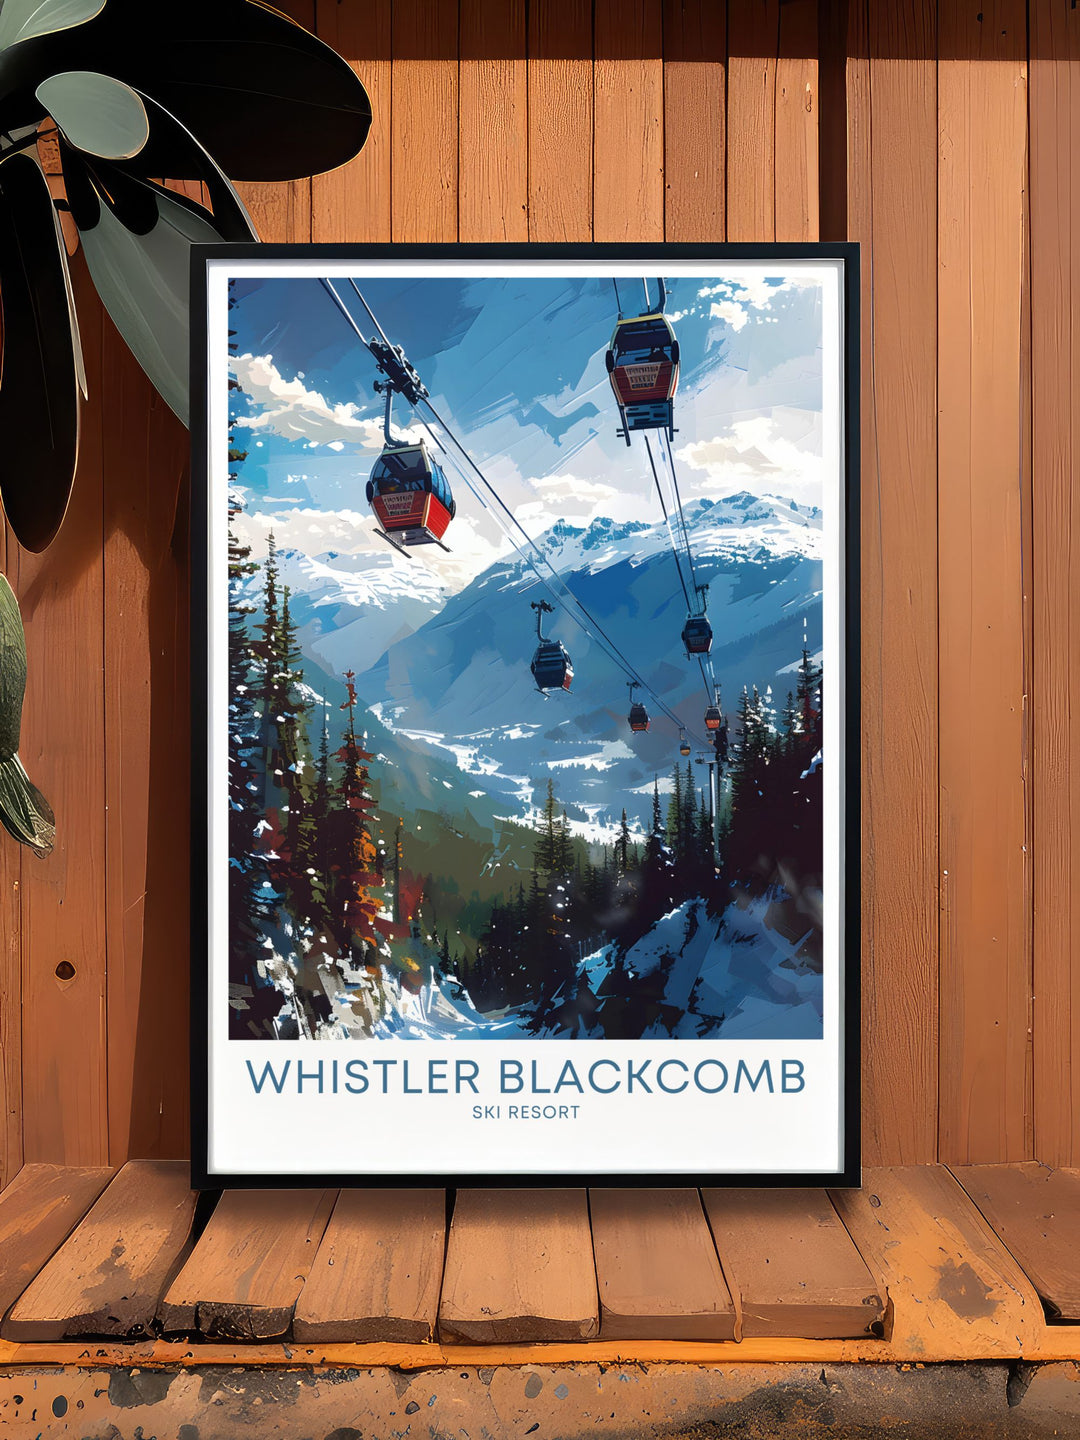 Beautifully crafted Whistler print featuring the iconic Peak 2 Peak Gondola. This stunning piece of skiing artwork brings the spirit of Whistler Blackcomb into your living space and makes a perfect snowboarding gift for any occasion.